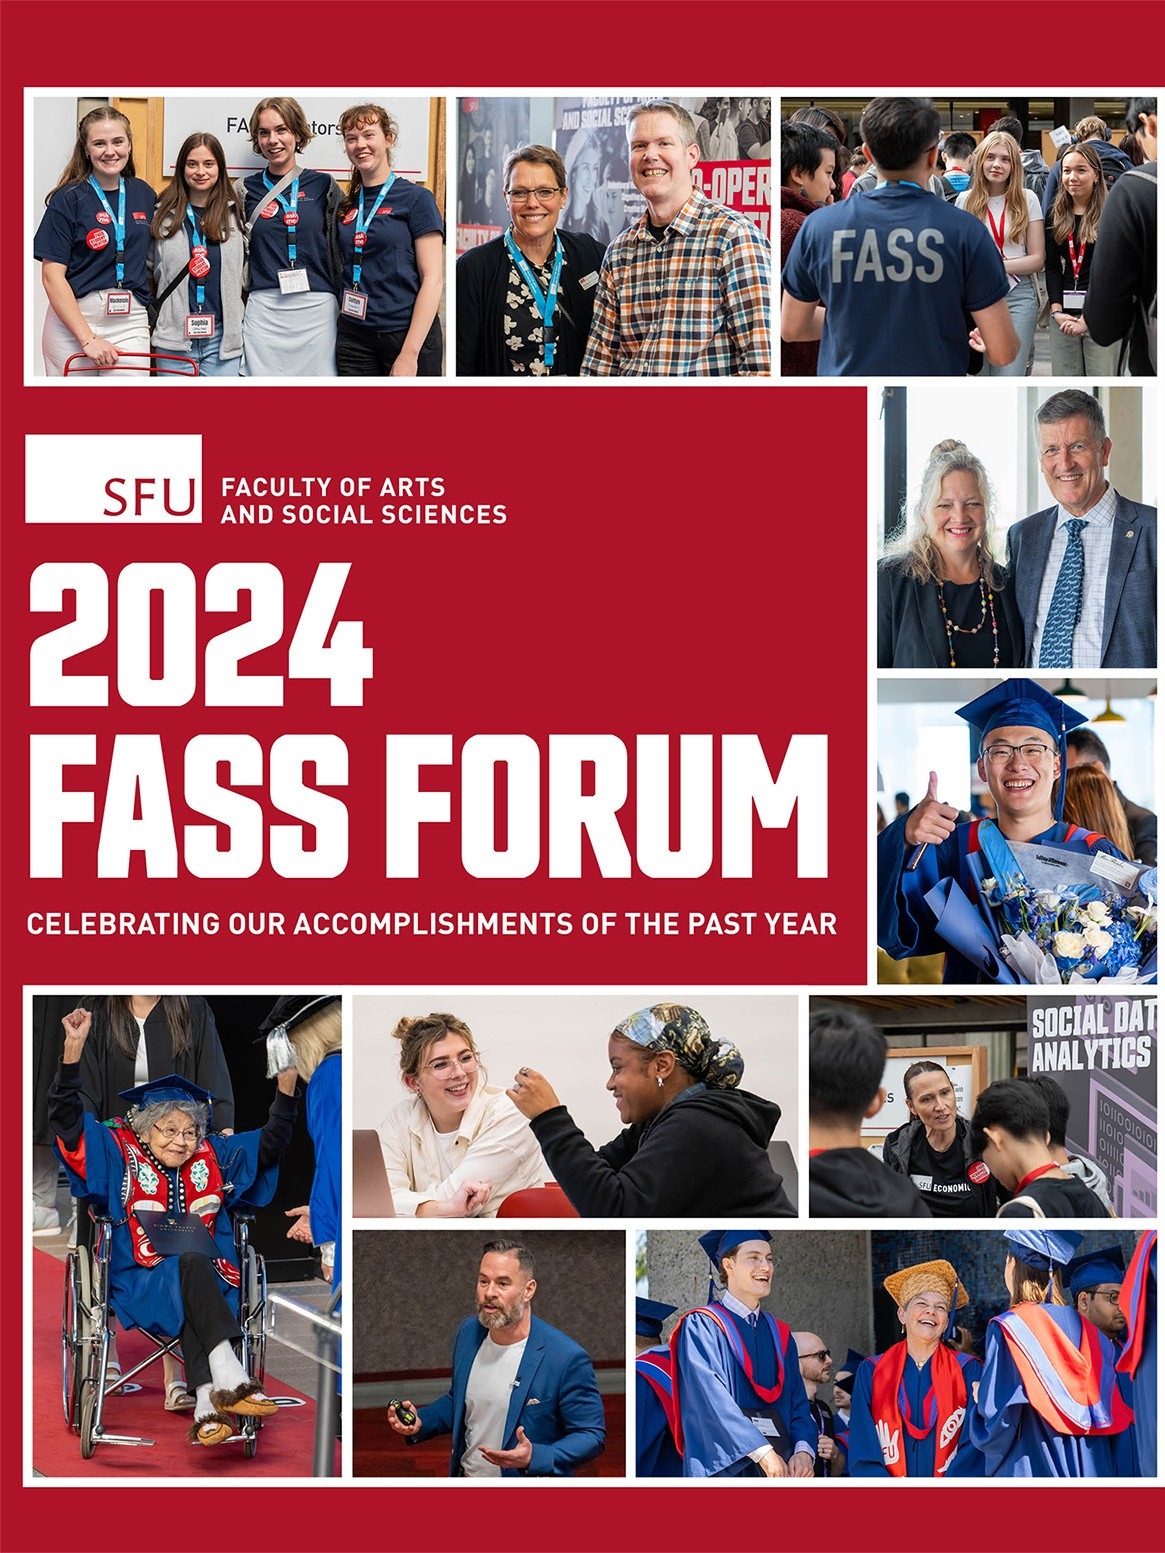 The cover photo of the 2024 FASS Forum Booklet. There is a collage of images including students, staff, and faculty at various FASS events. In large white text on a red background reads 2024 FASS FORUM CELEBRATING OUR ACCOMPLISHMENTS OF THE PAST YEAR. 